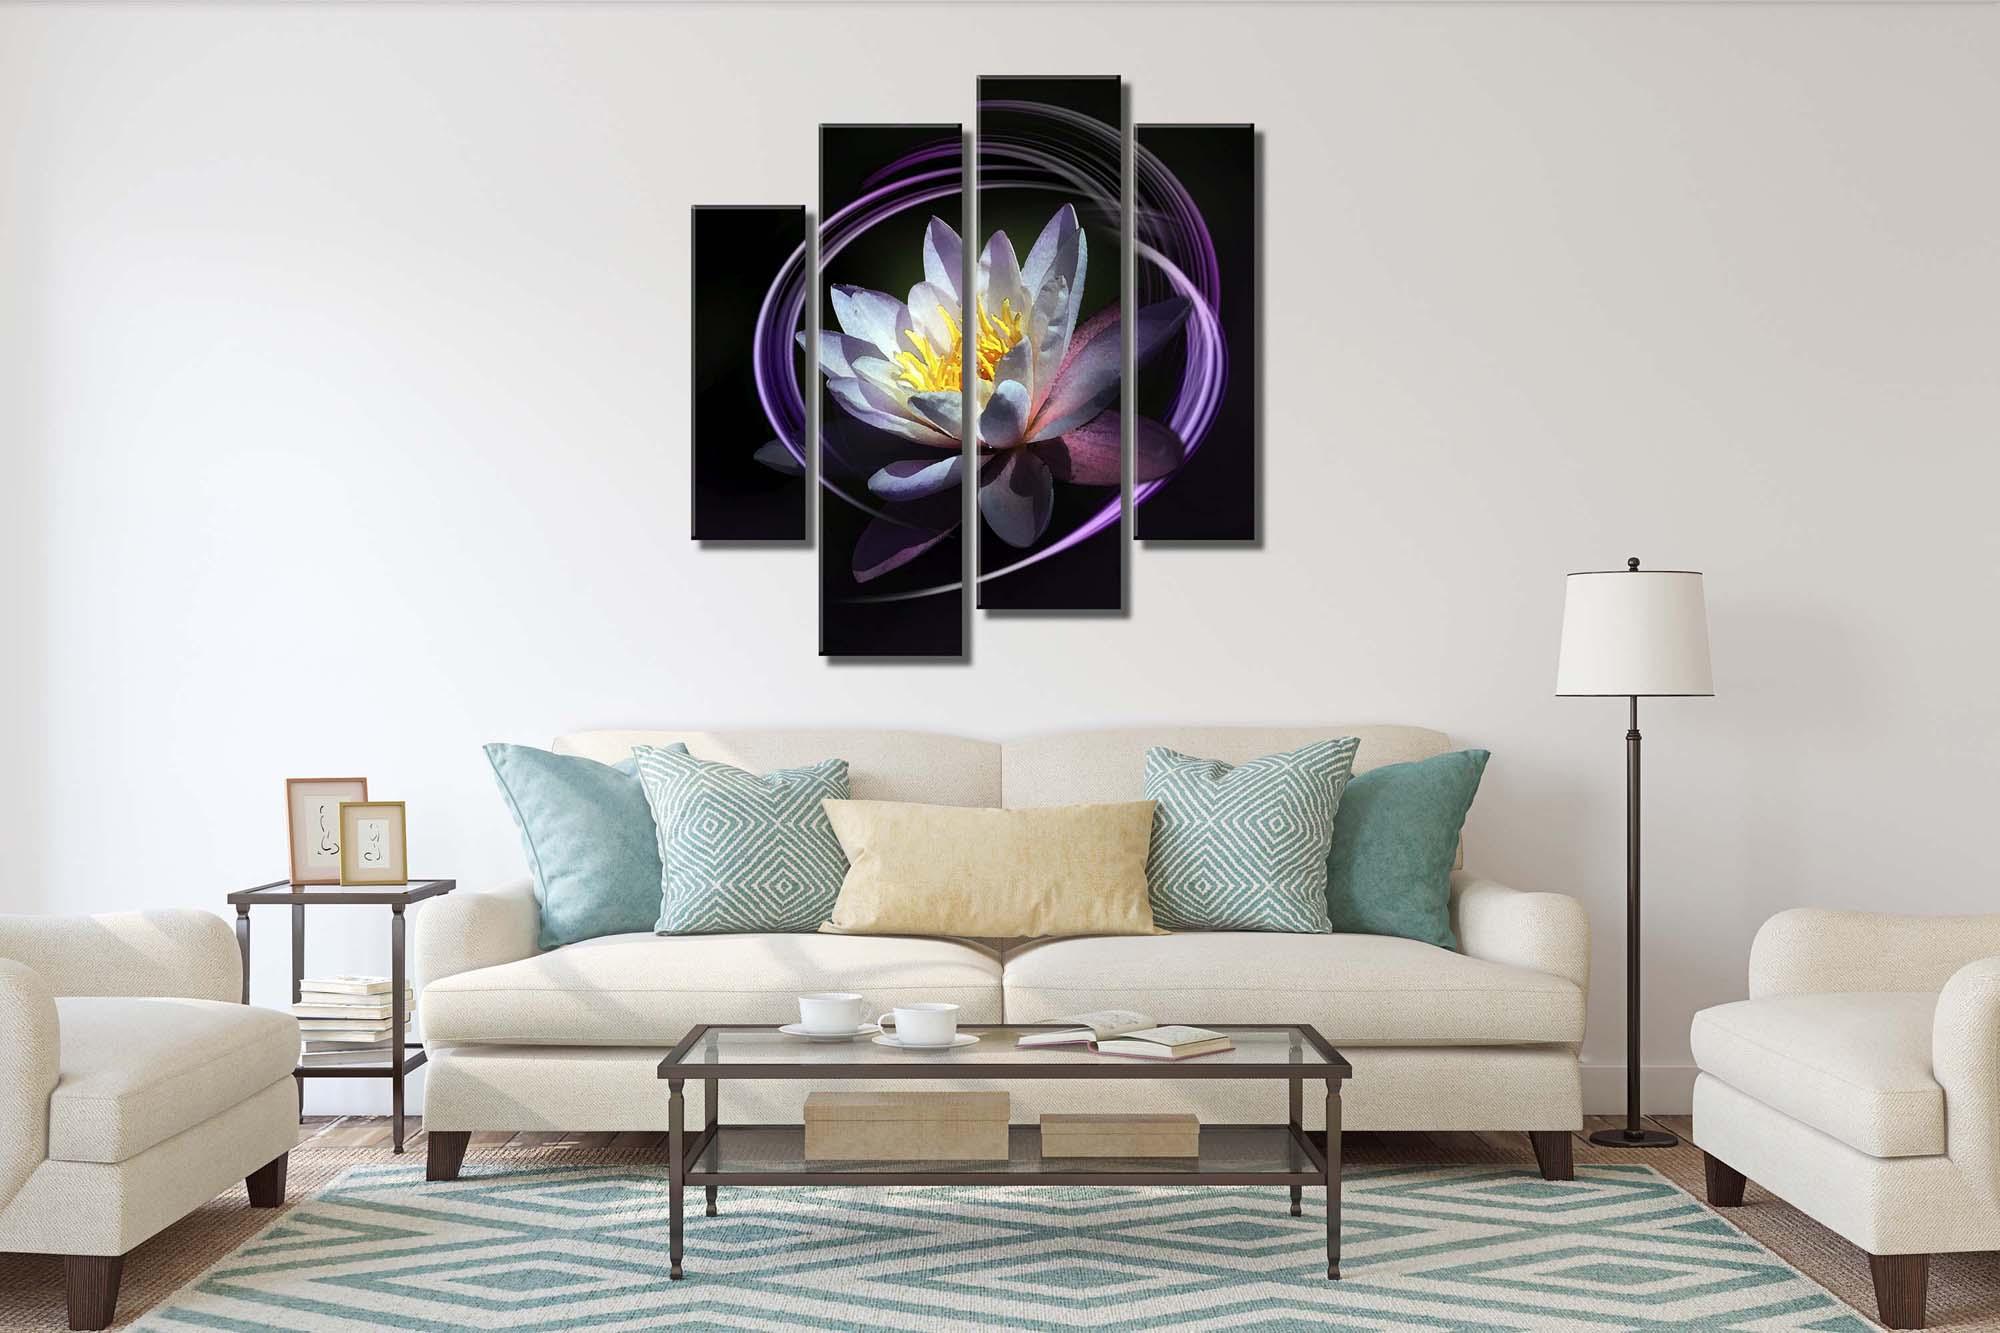 Modular picture - blooming water lily on a black background